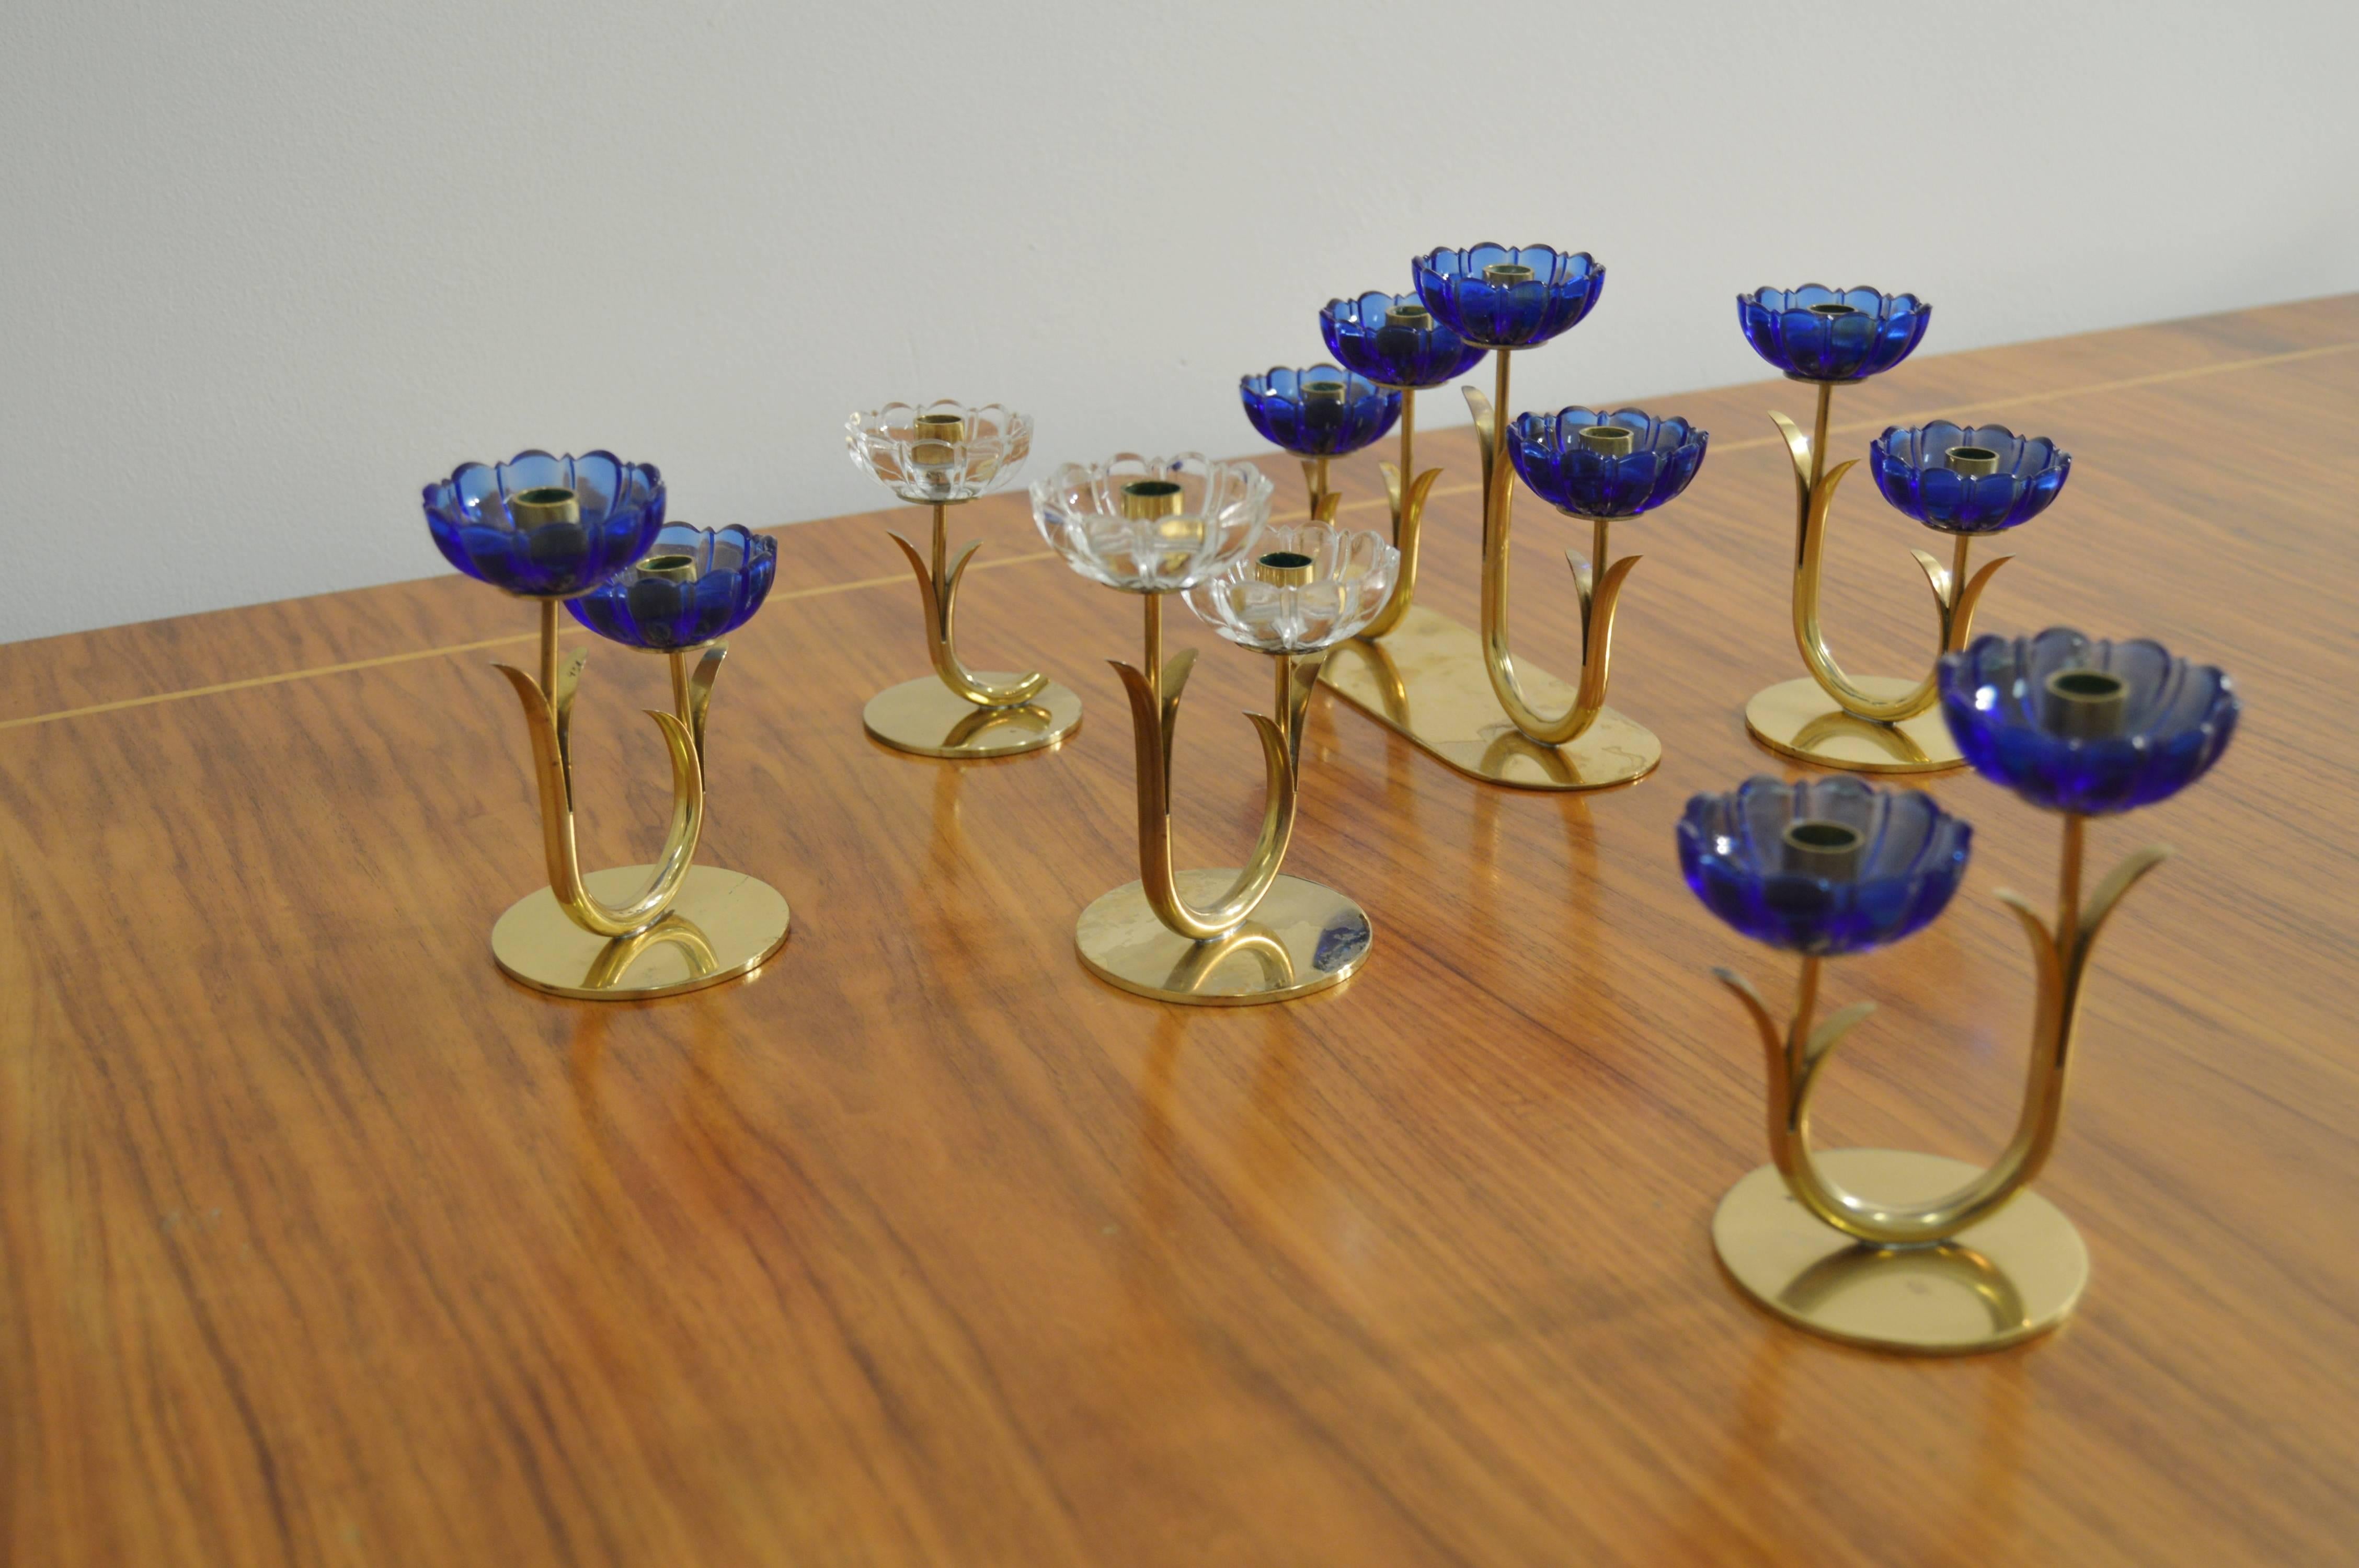 Set of six candleholders by Gunnar Ander for Ystad Metall.
year circa 1950.
Brass and colored glass in very good vintage condition.
Measures is for the largest one, but the height is the same for all in the same length range.